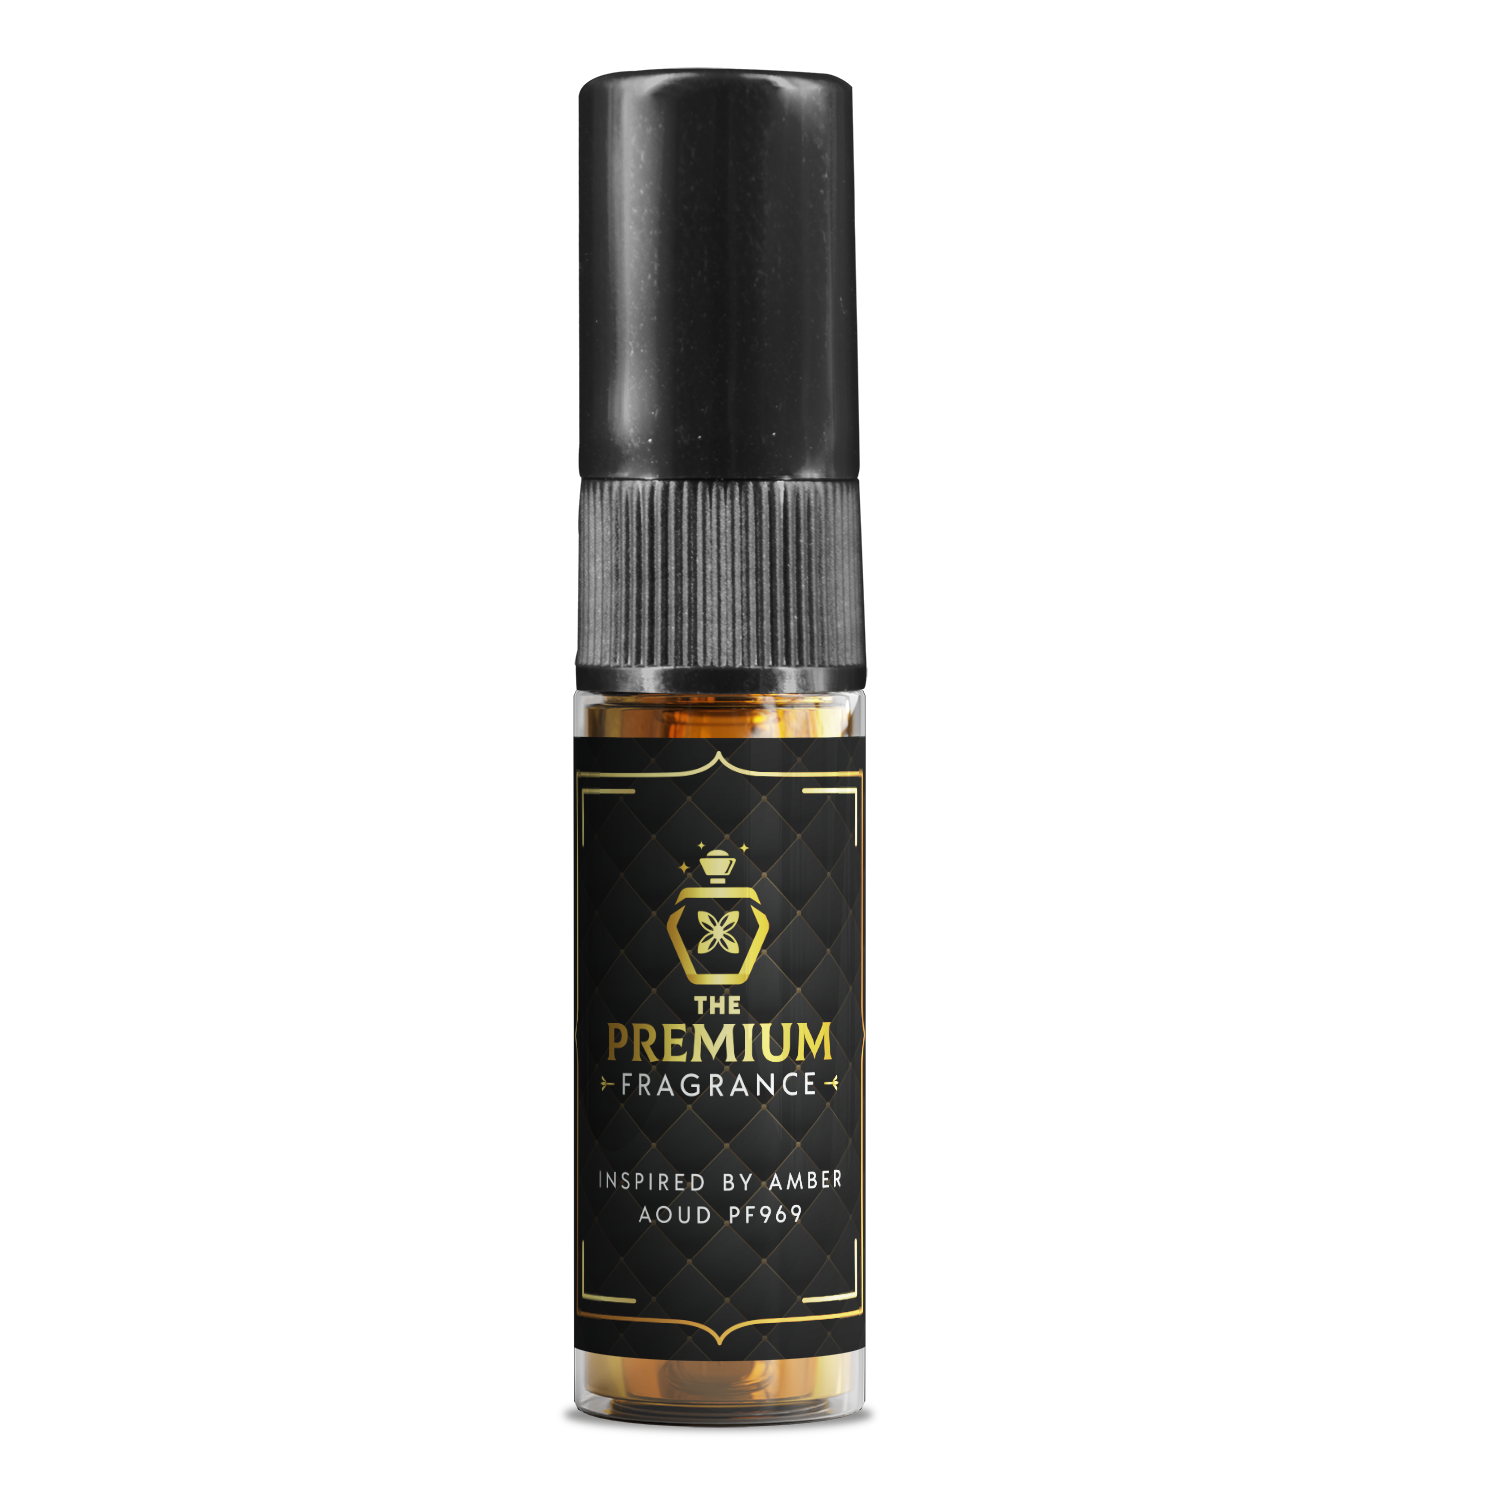 Fragrance Inspired by Amber Aoud - 3ml - PF969